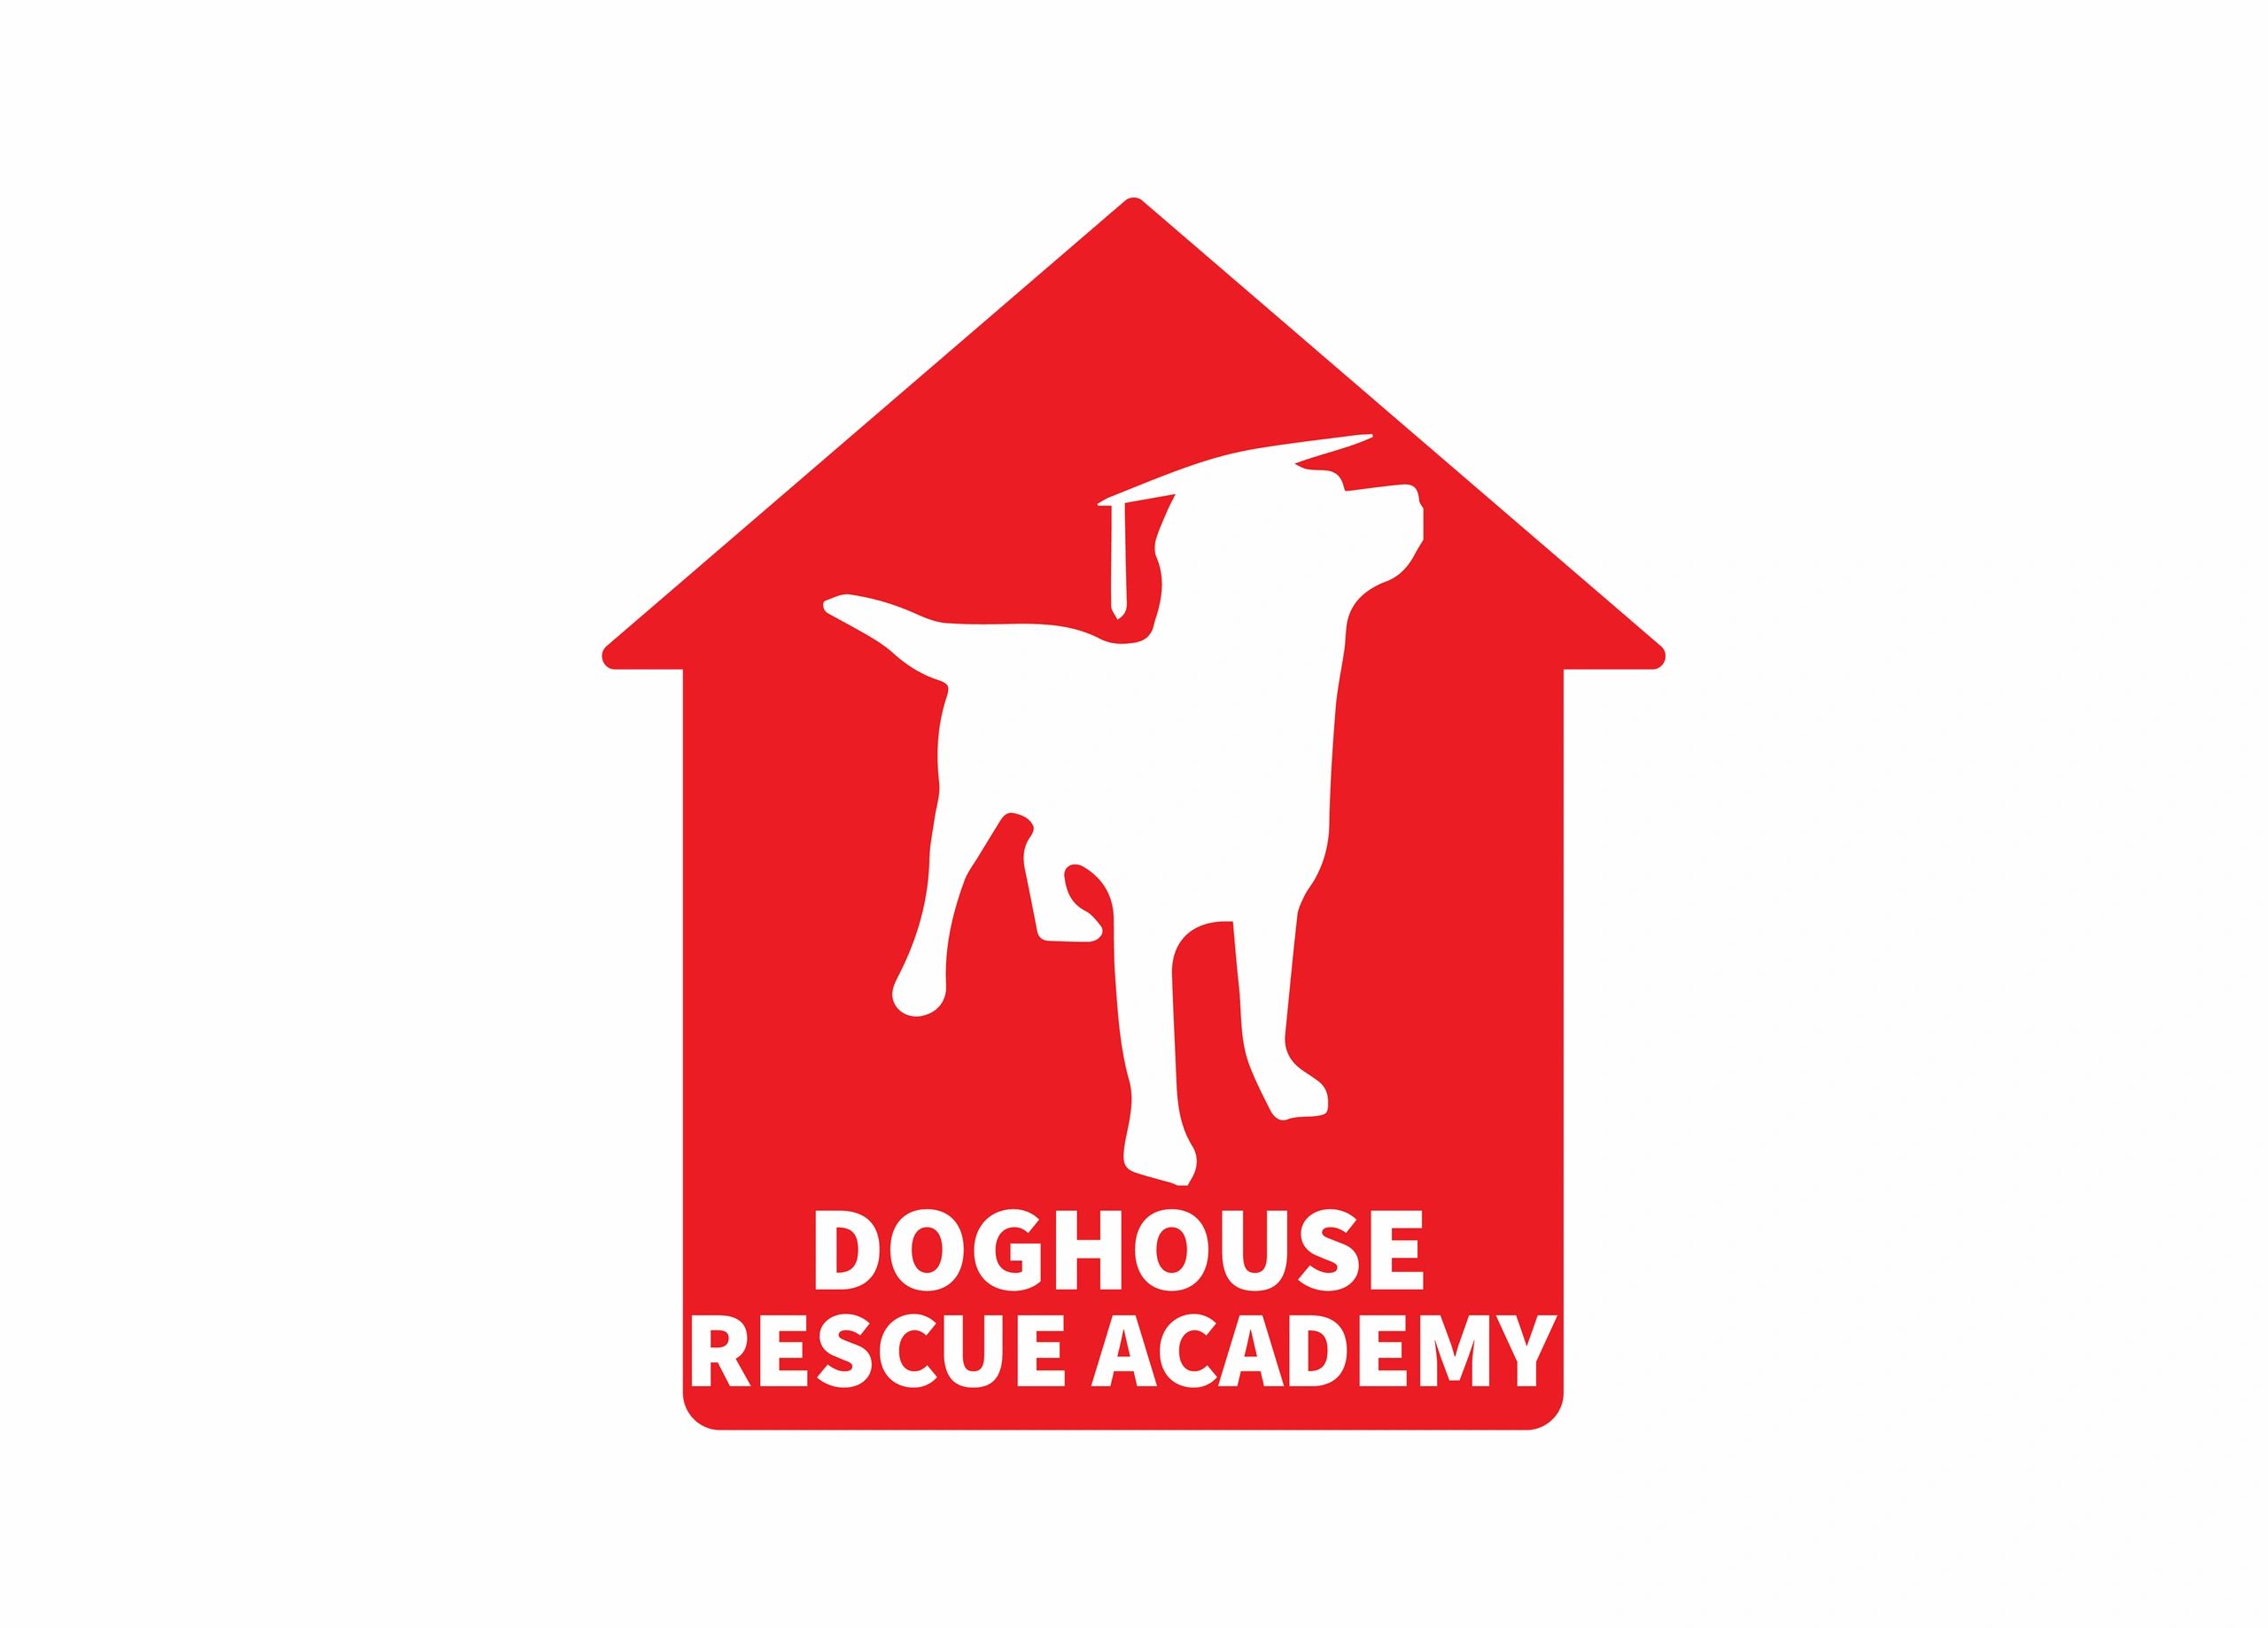 Doghouse Rescue Academy Inc